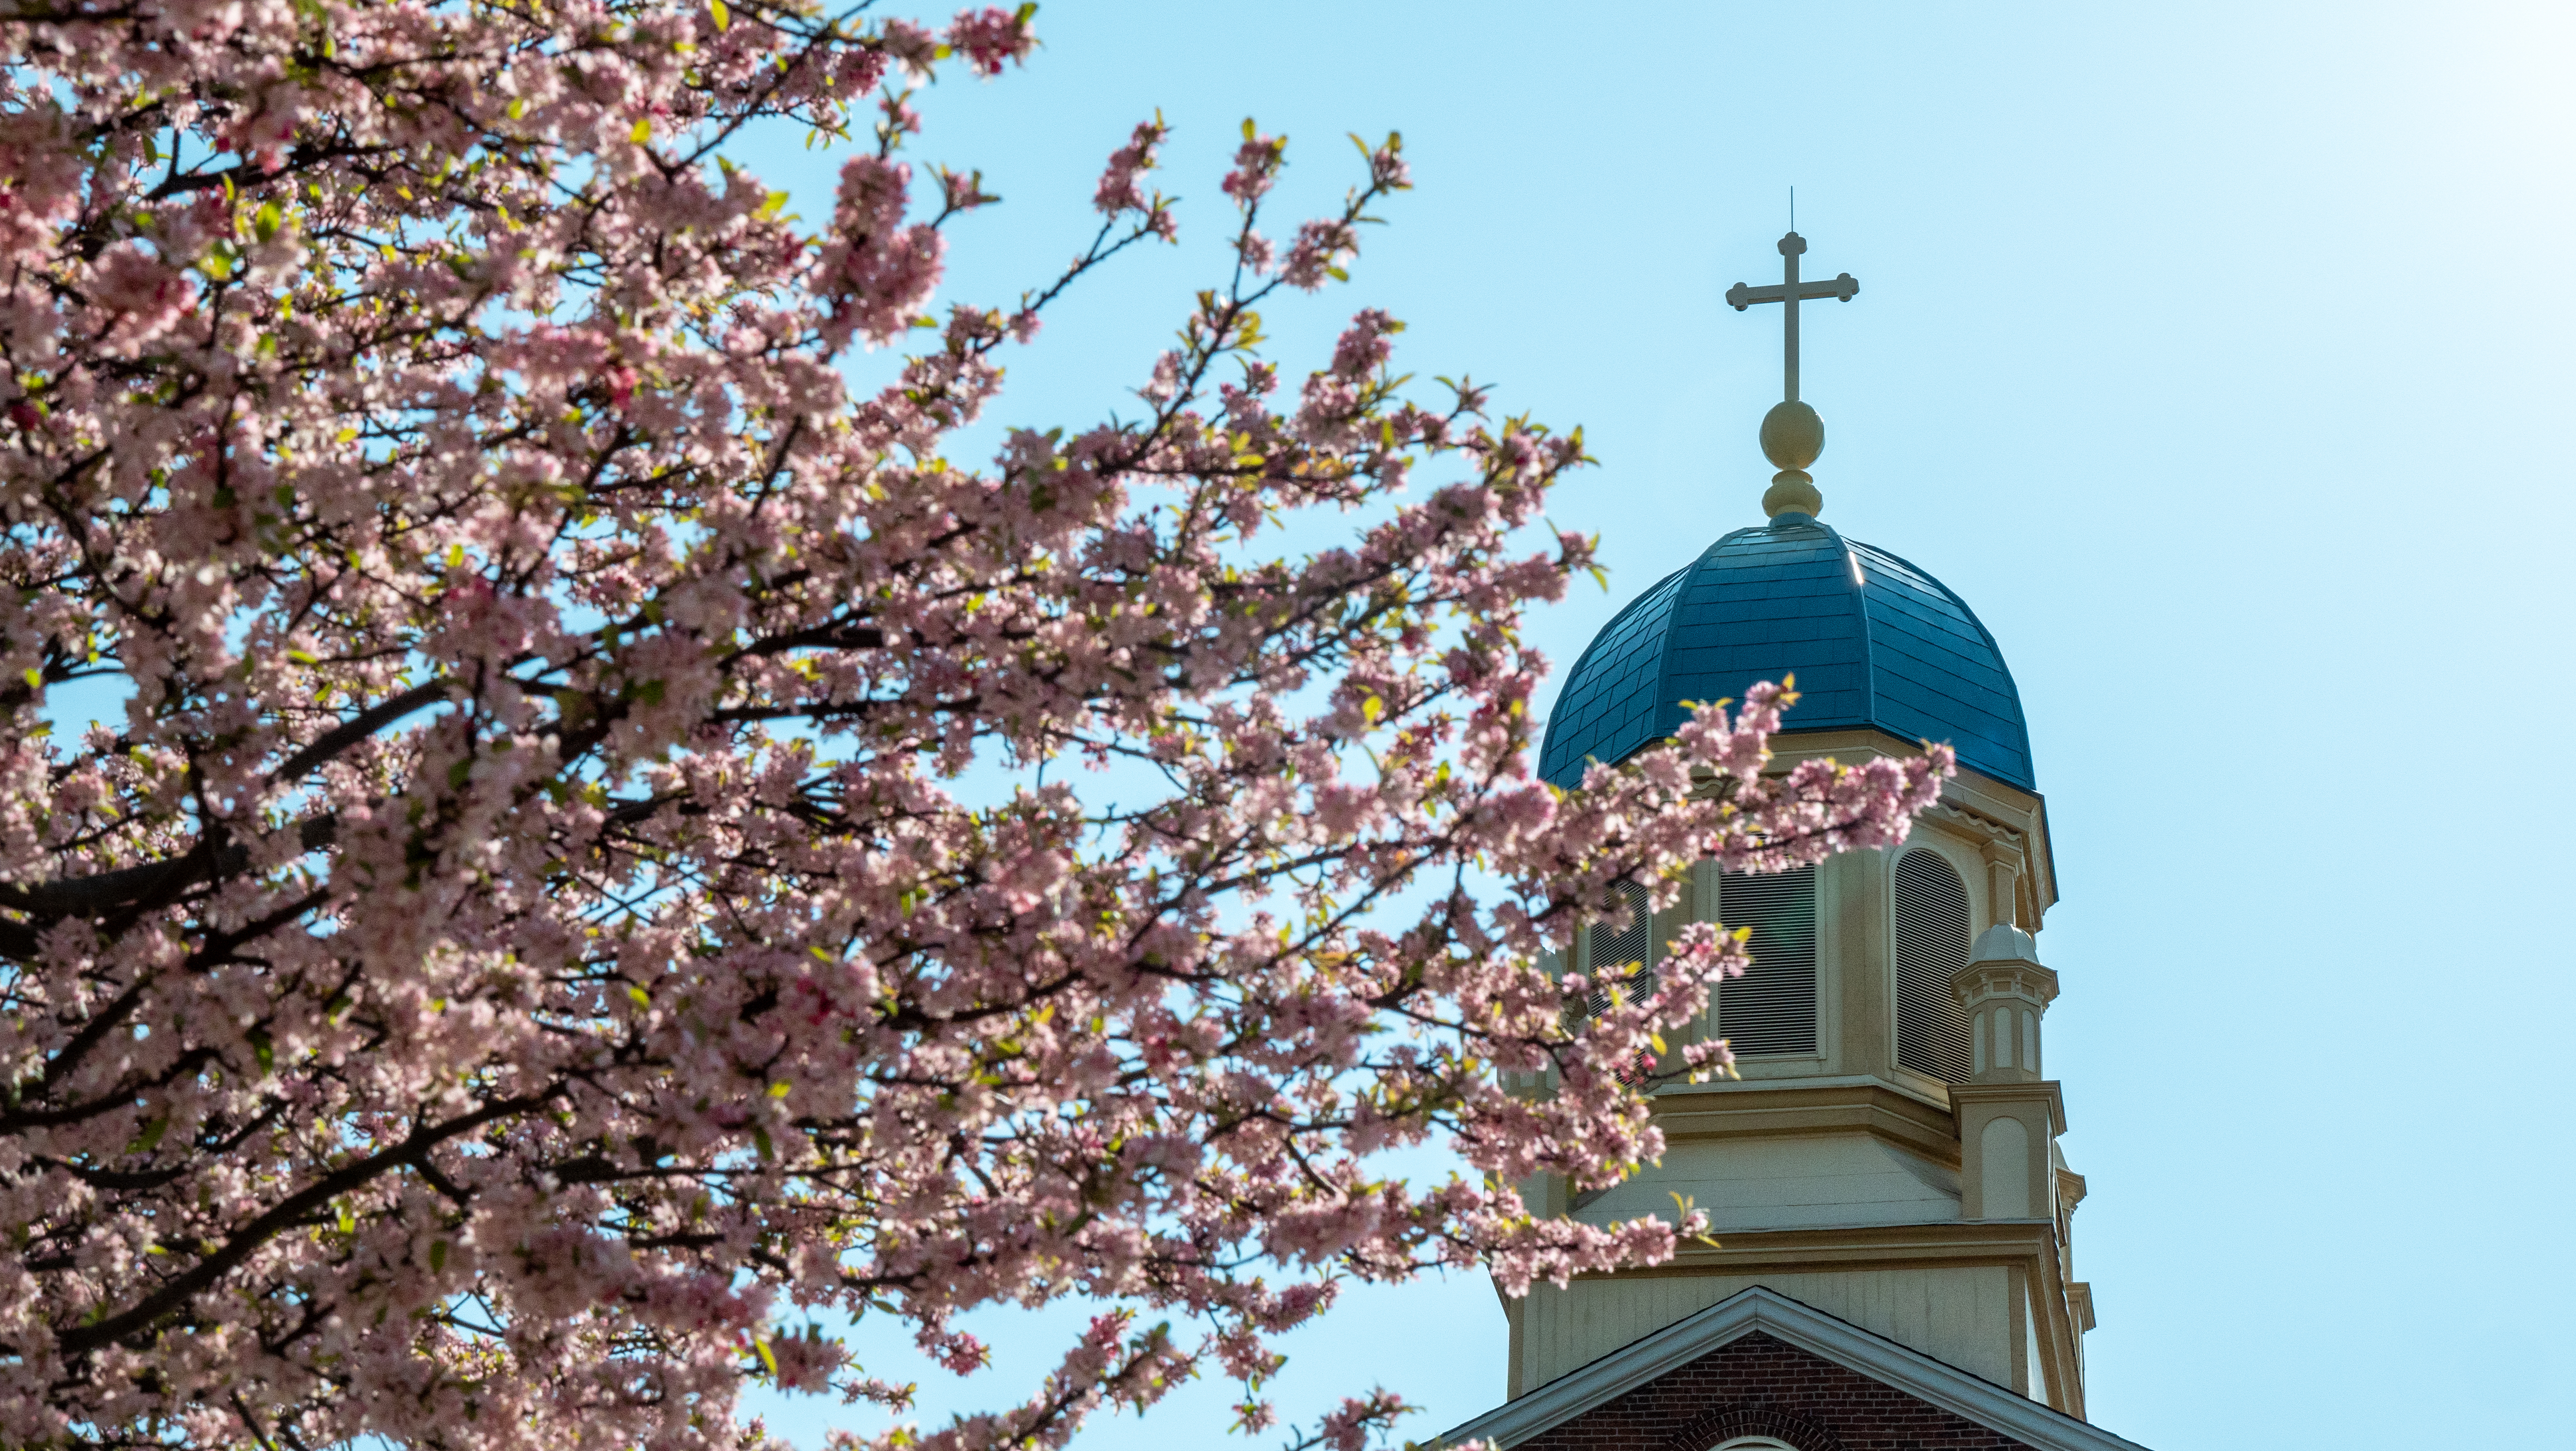 ${ Cherry Blossoms over Top of the chapel }